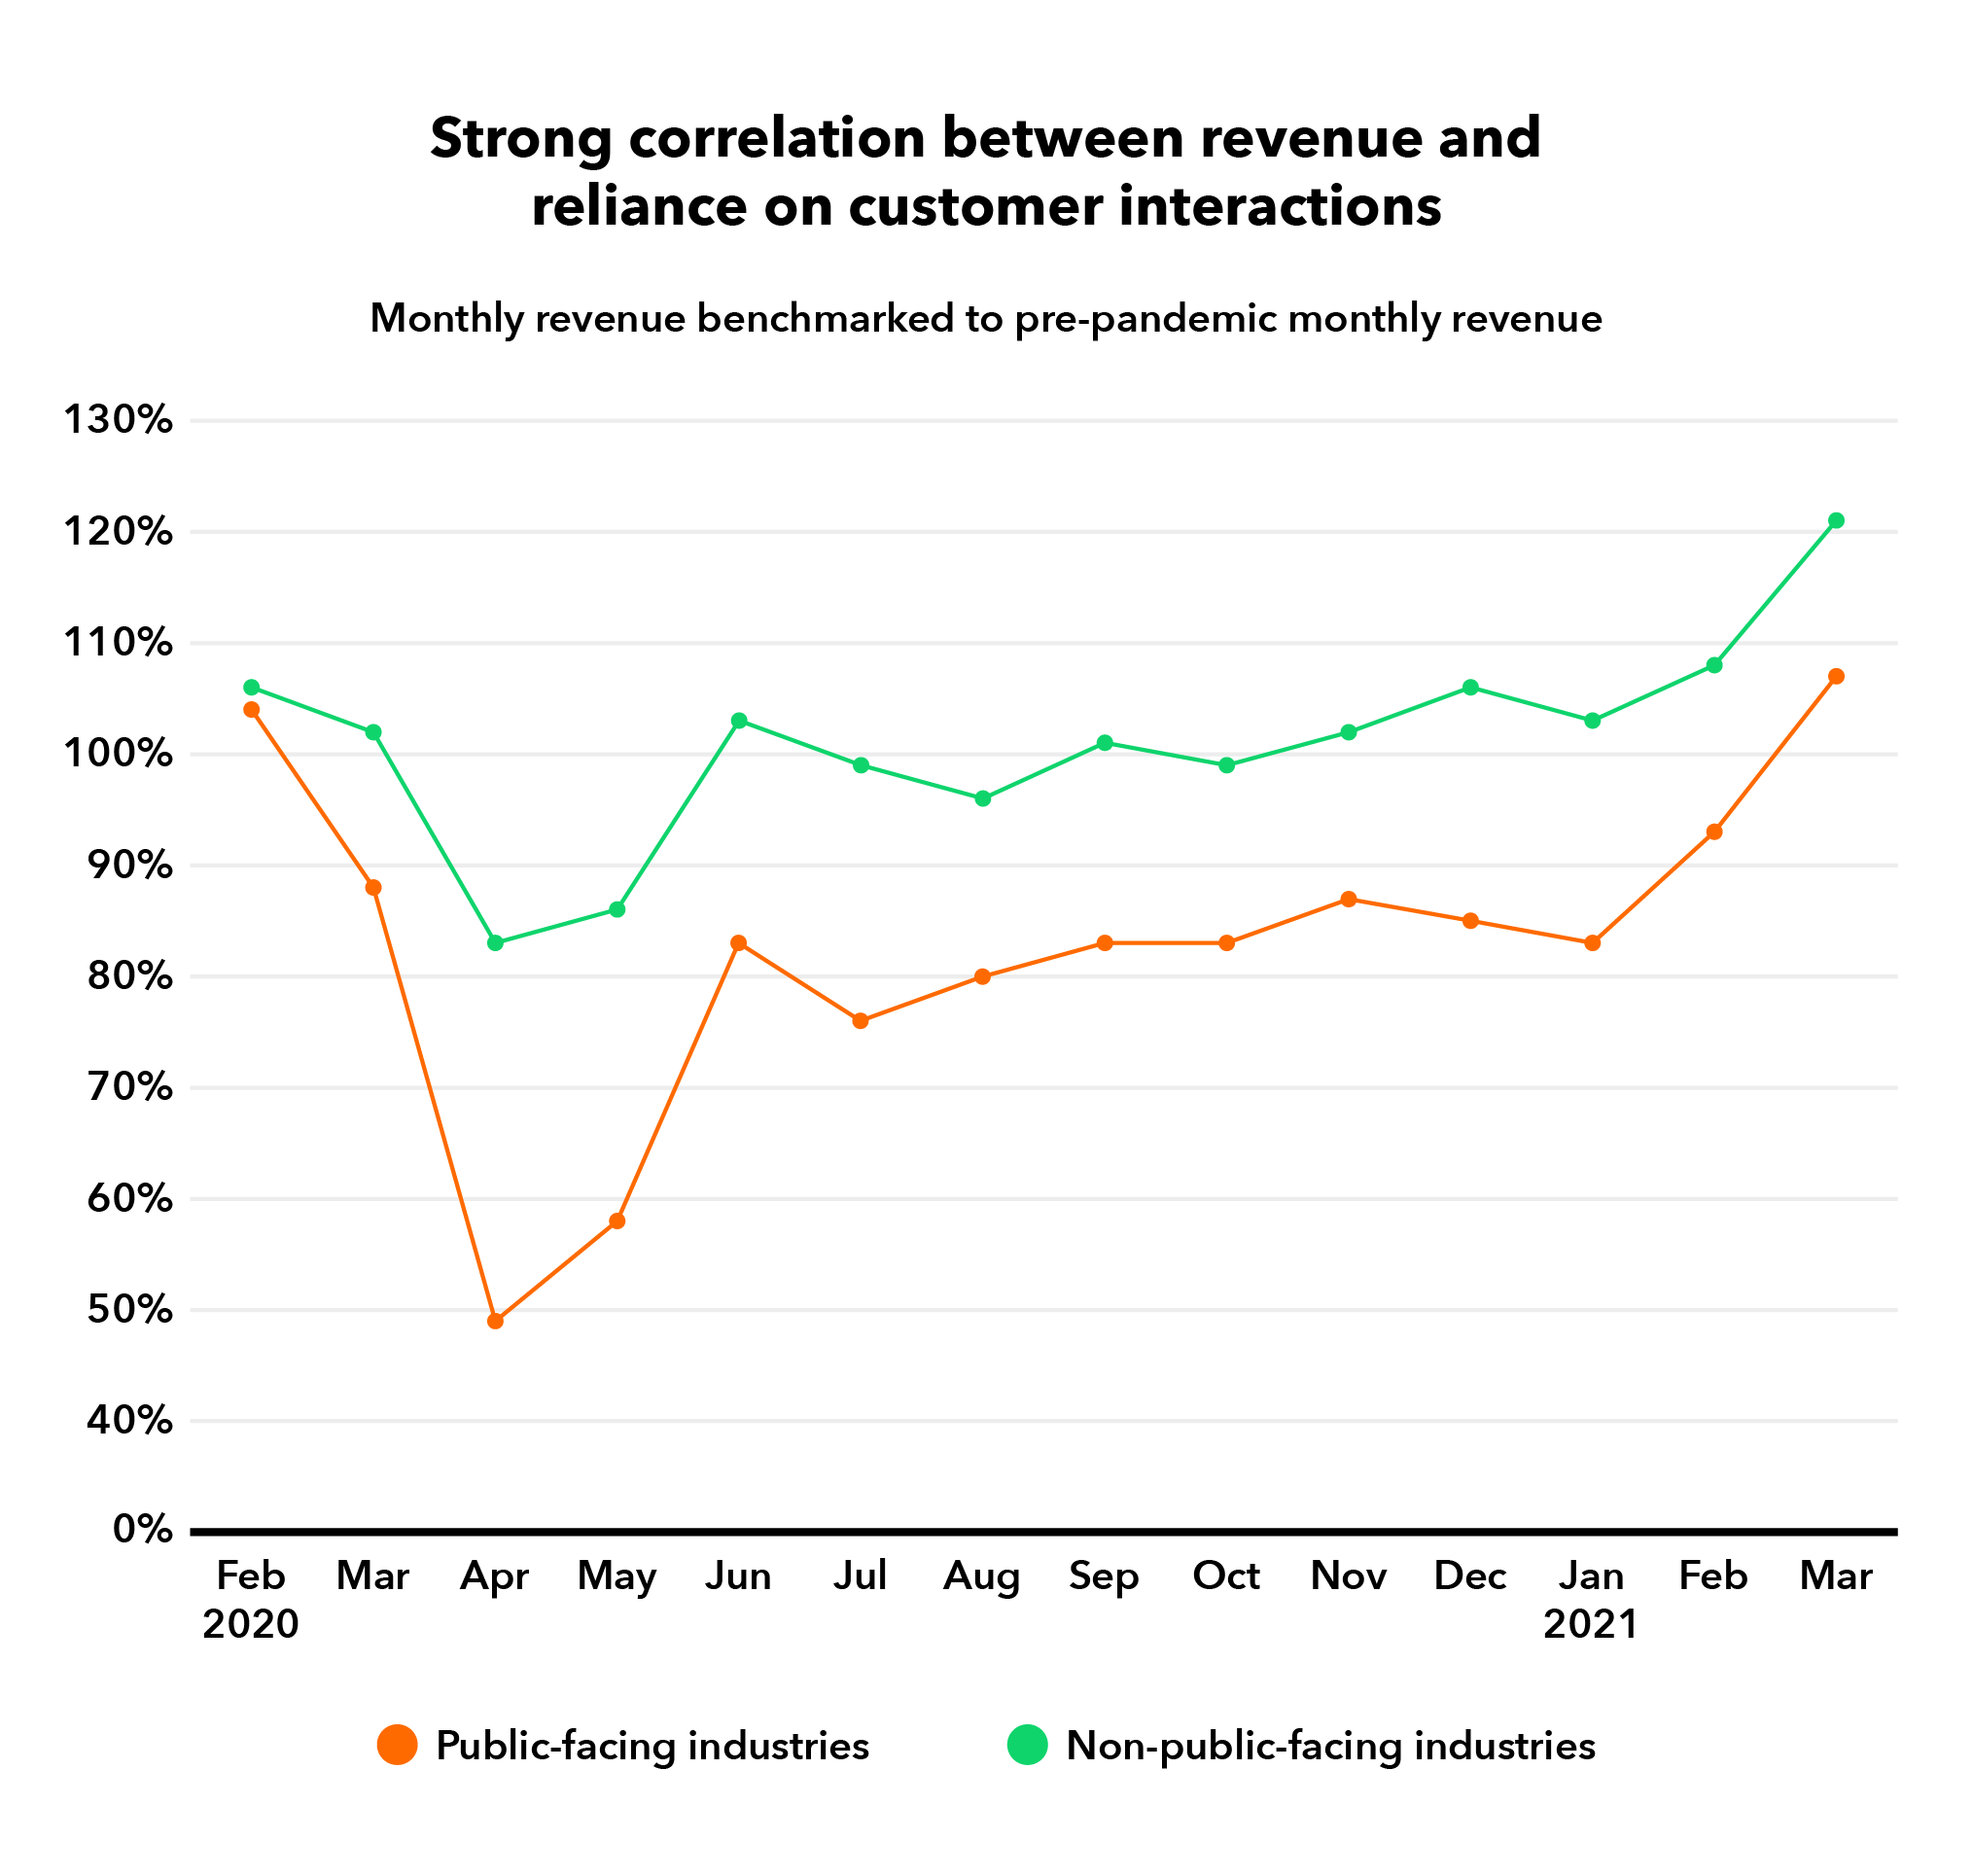 Strong correlation between revenue and reliance on customer interactions